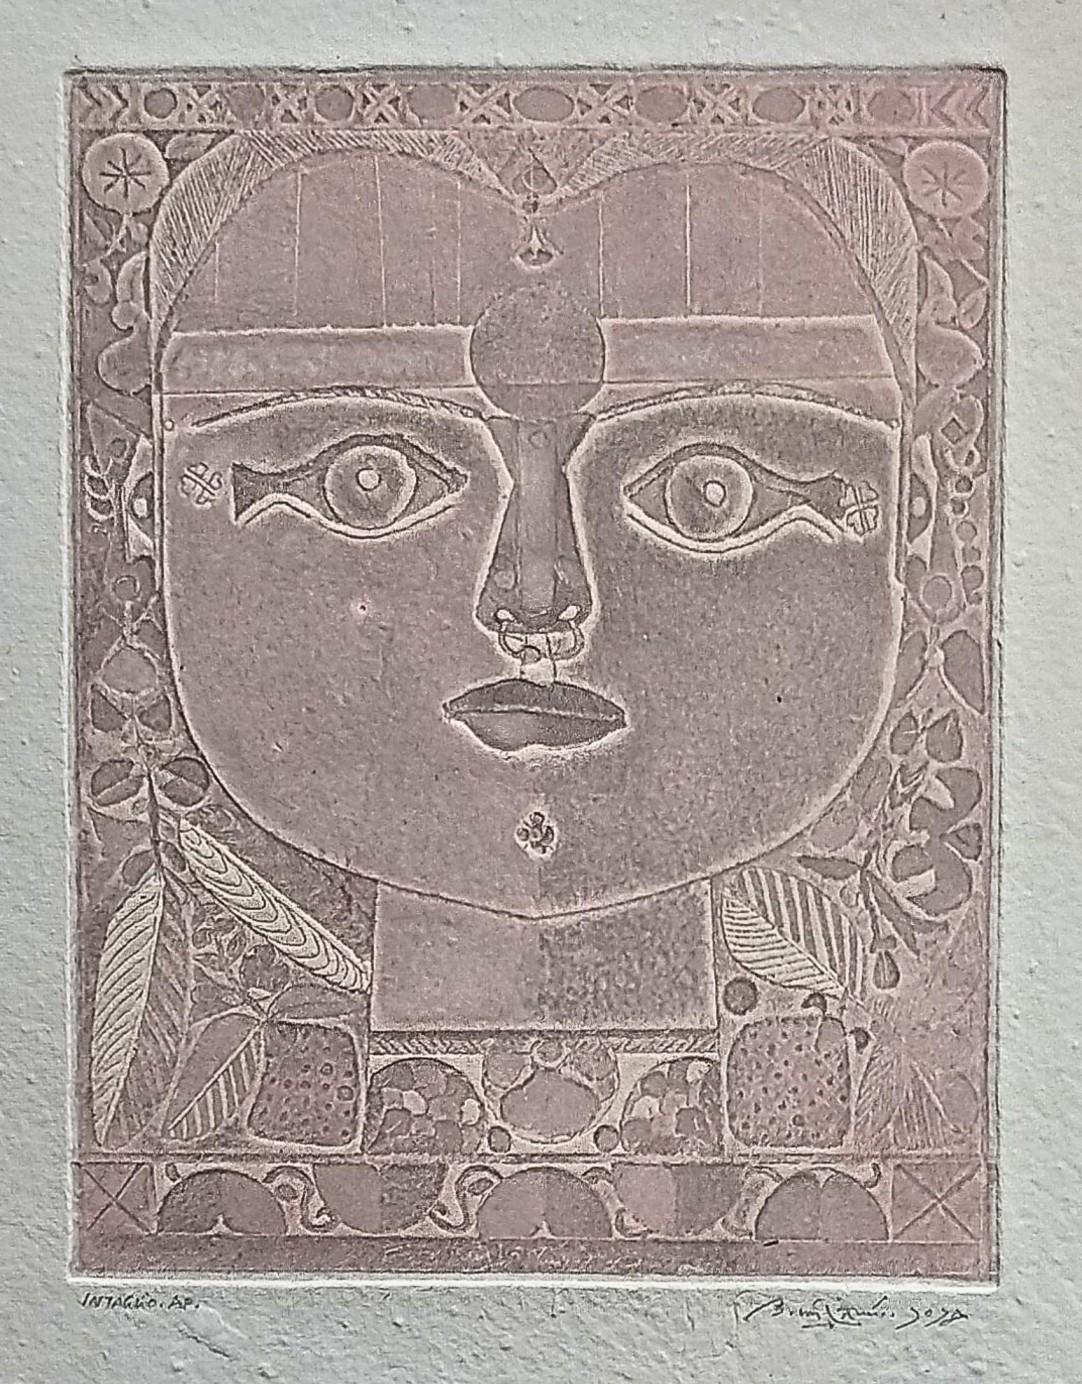 Untitled, Intaglio on Paper by Modern Indian Artist  "In Stock" (Set of 2 Works)